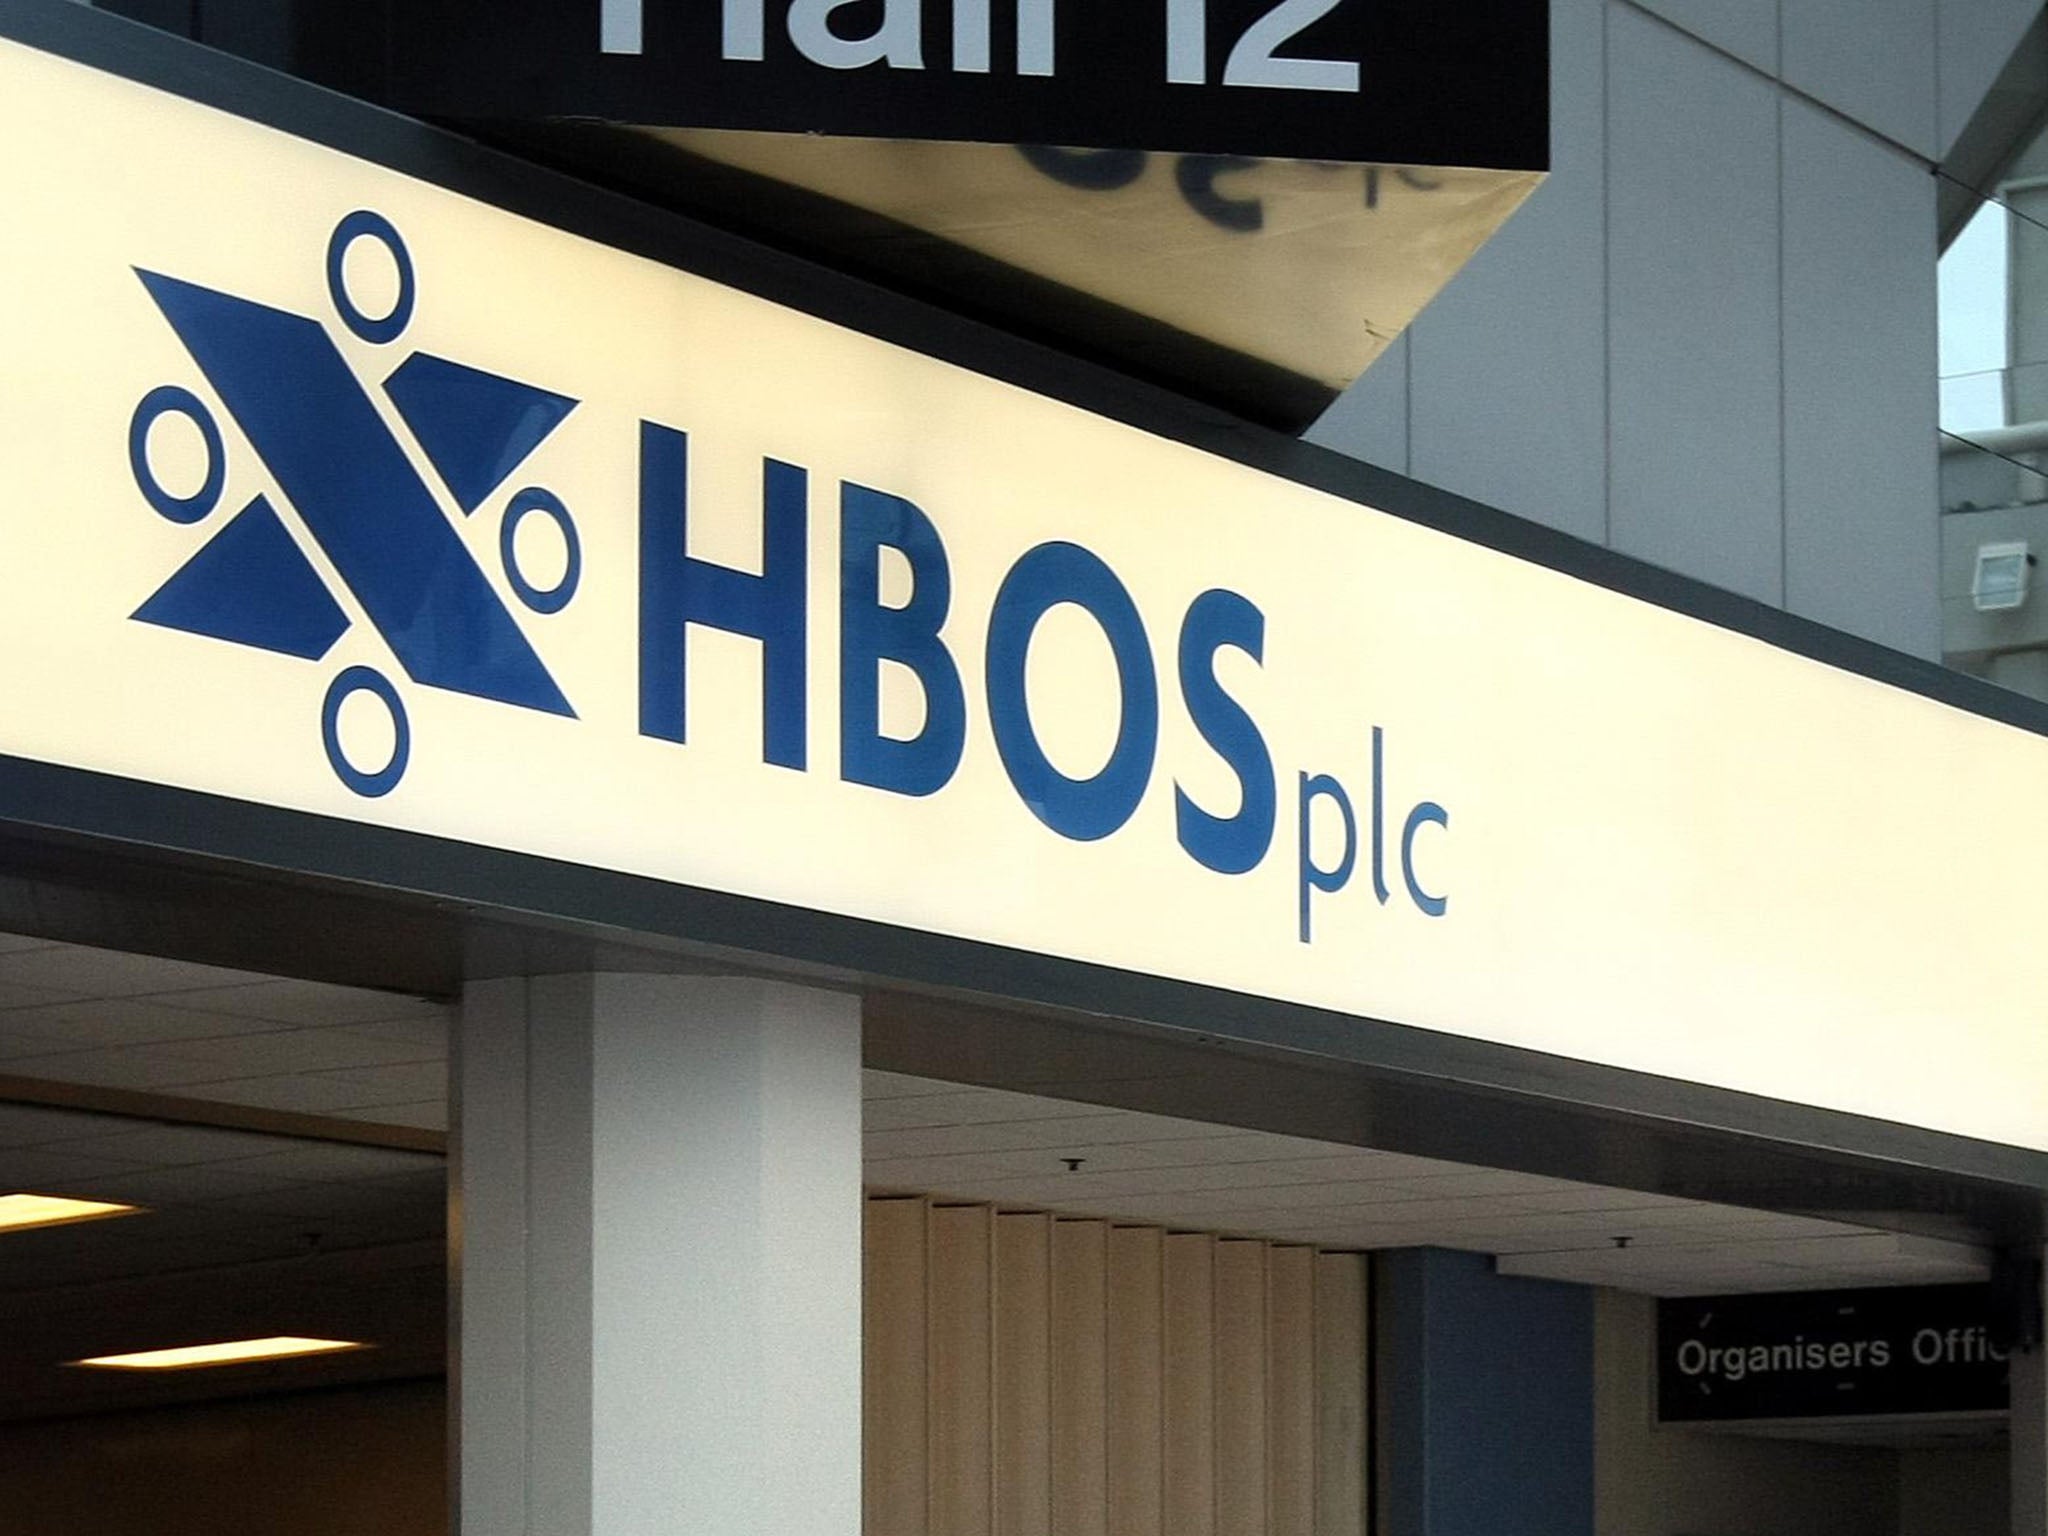 HBOS: The fraud at the Reading branch of the bank, now owned by Lloyds, continues to cause scandal